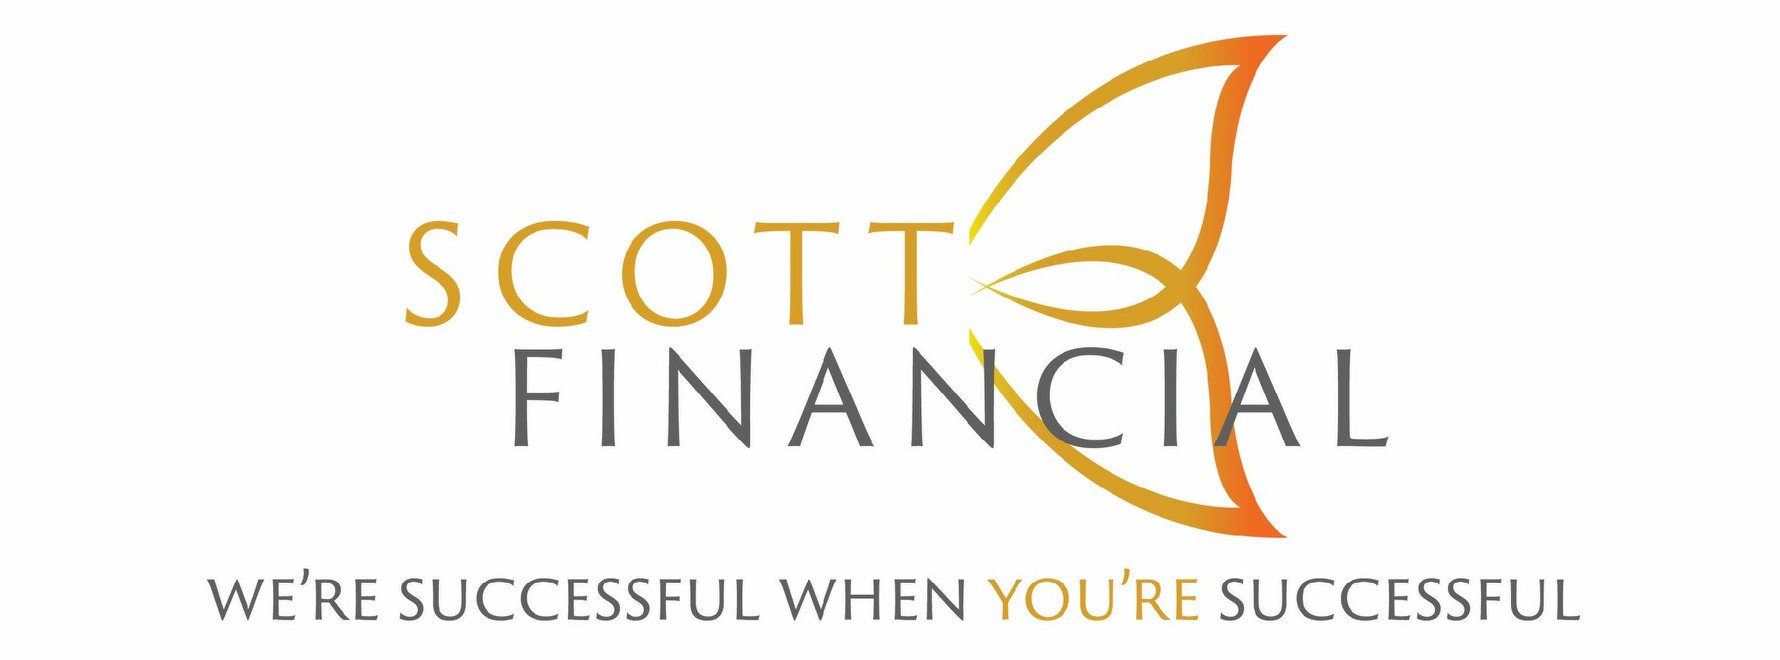 Scott Financial Consulting Services - Phyllis Scott CPA